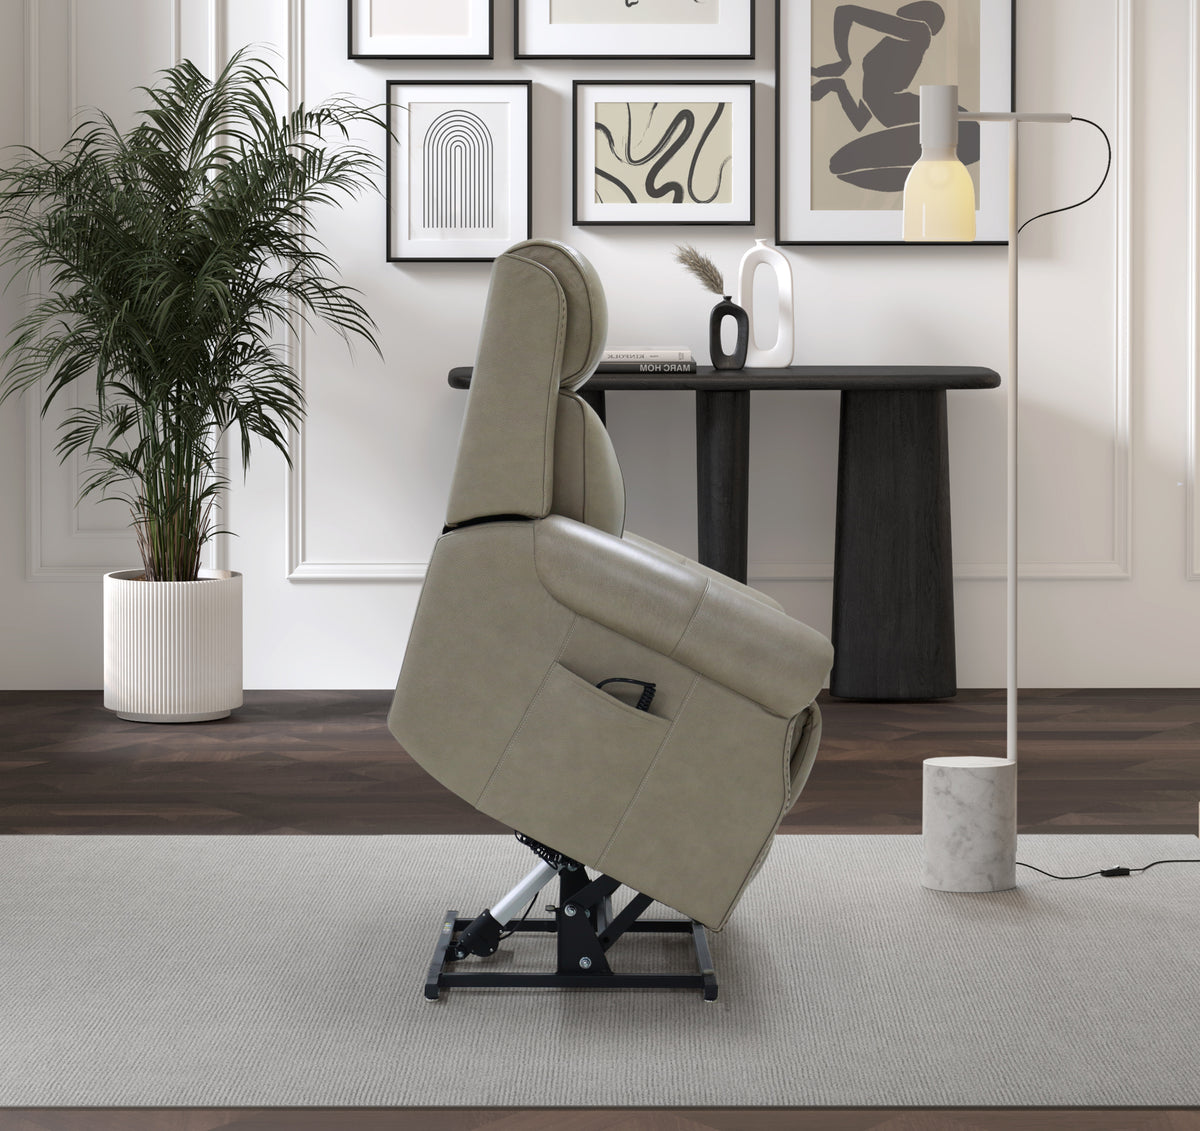 Tranquil Lift Chair Power Recliner - Leather-Like